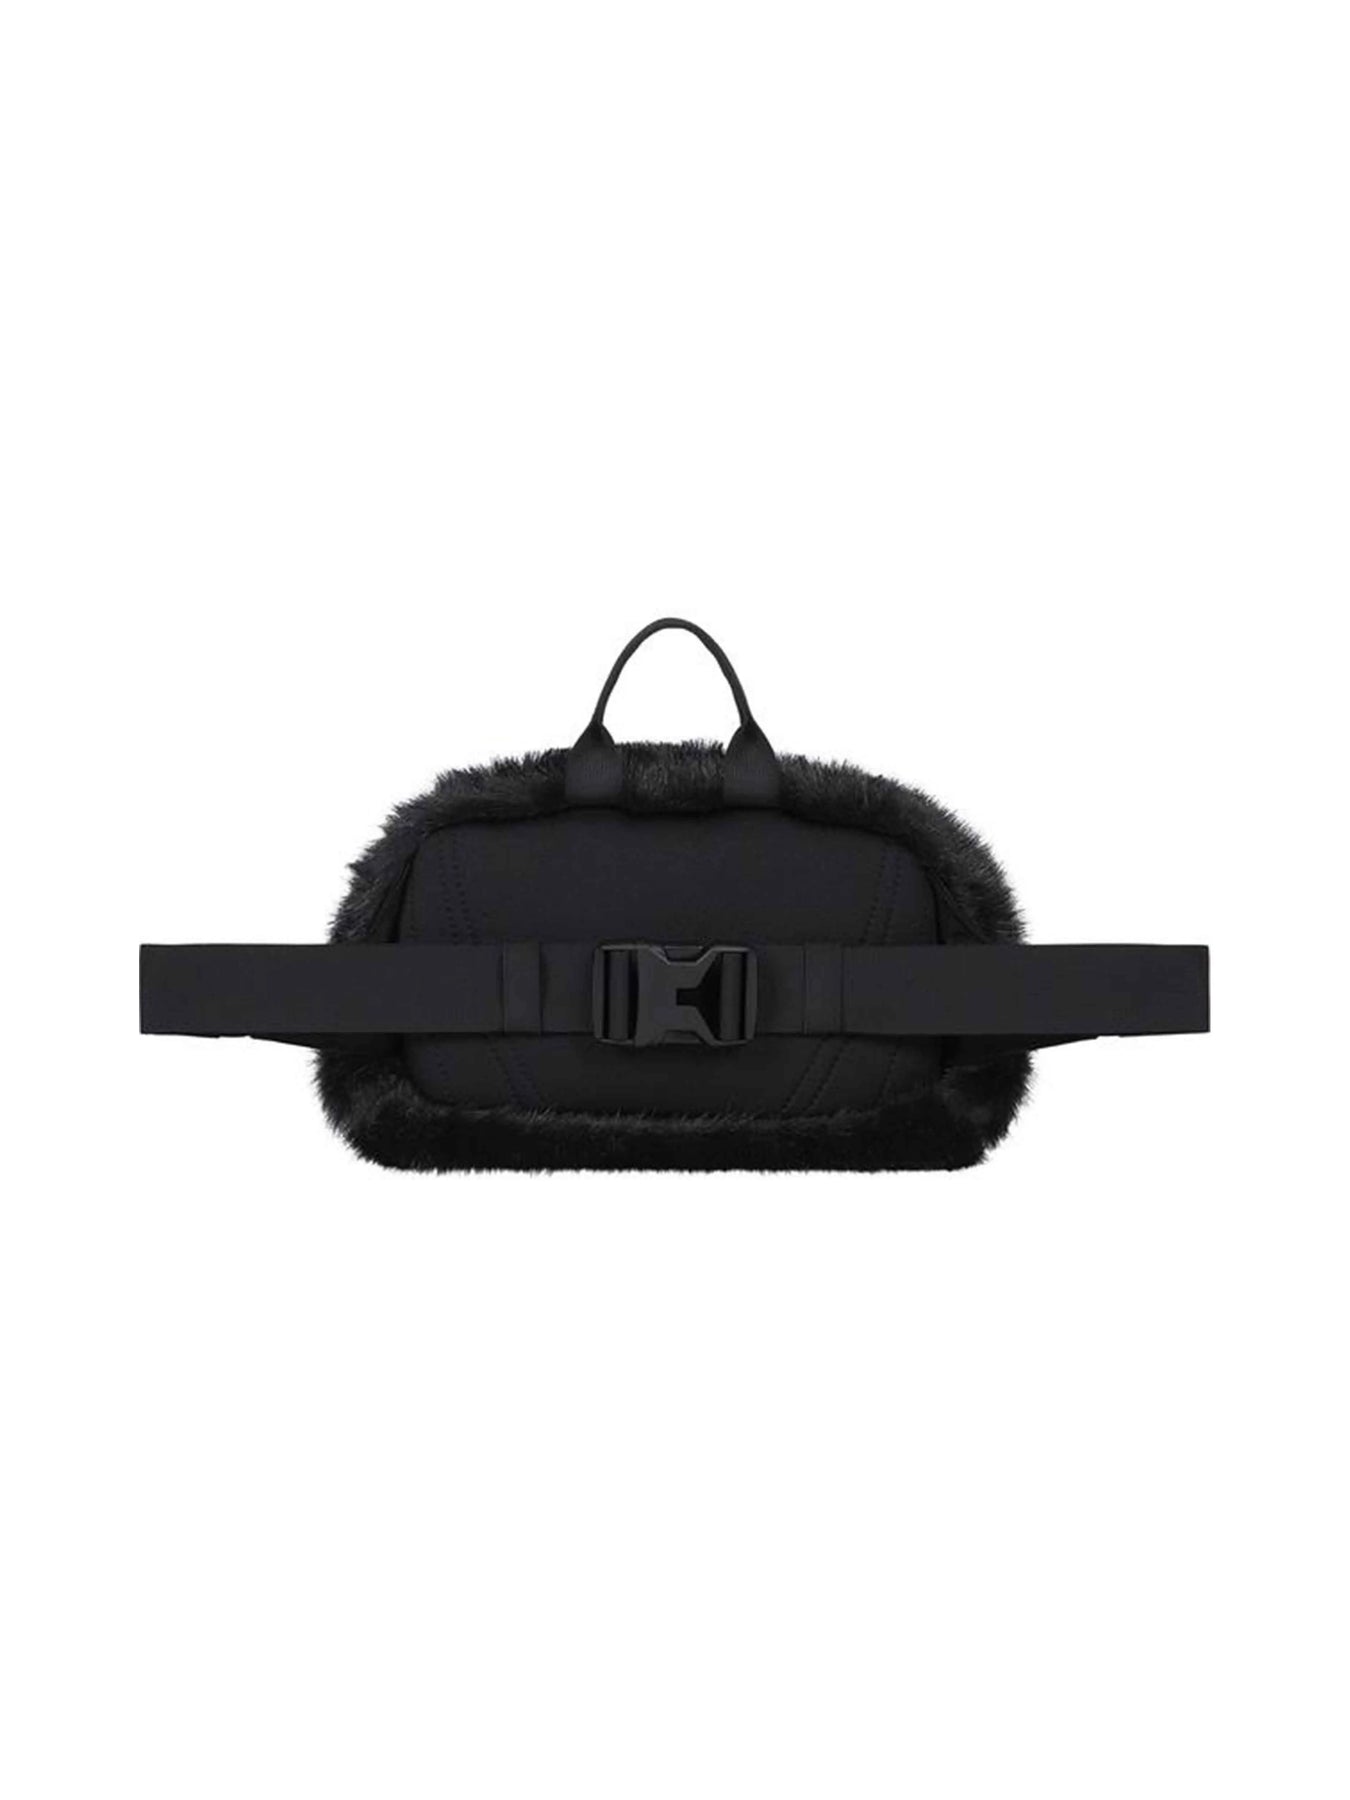 Supreme X The North Face Faux Fur Waist Bag Black [FW20] in